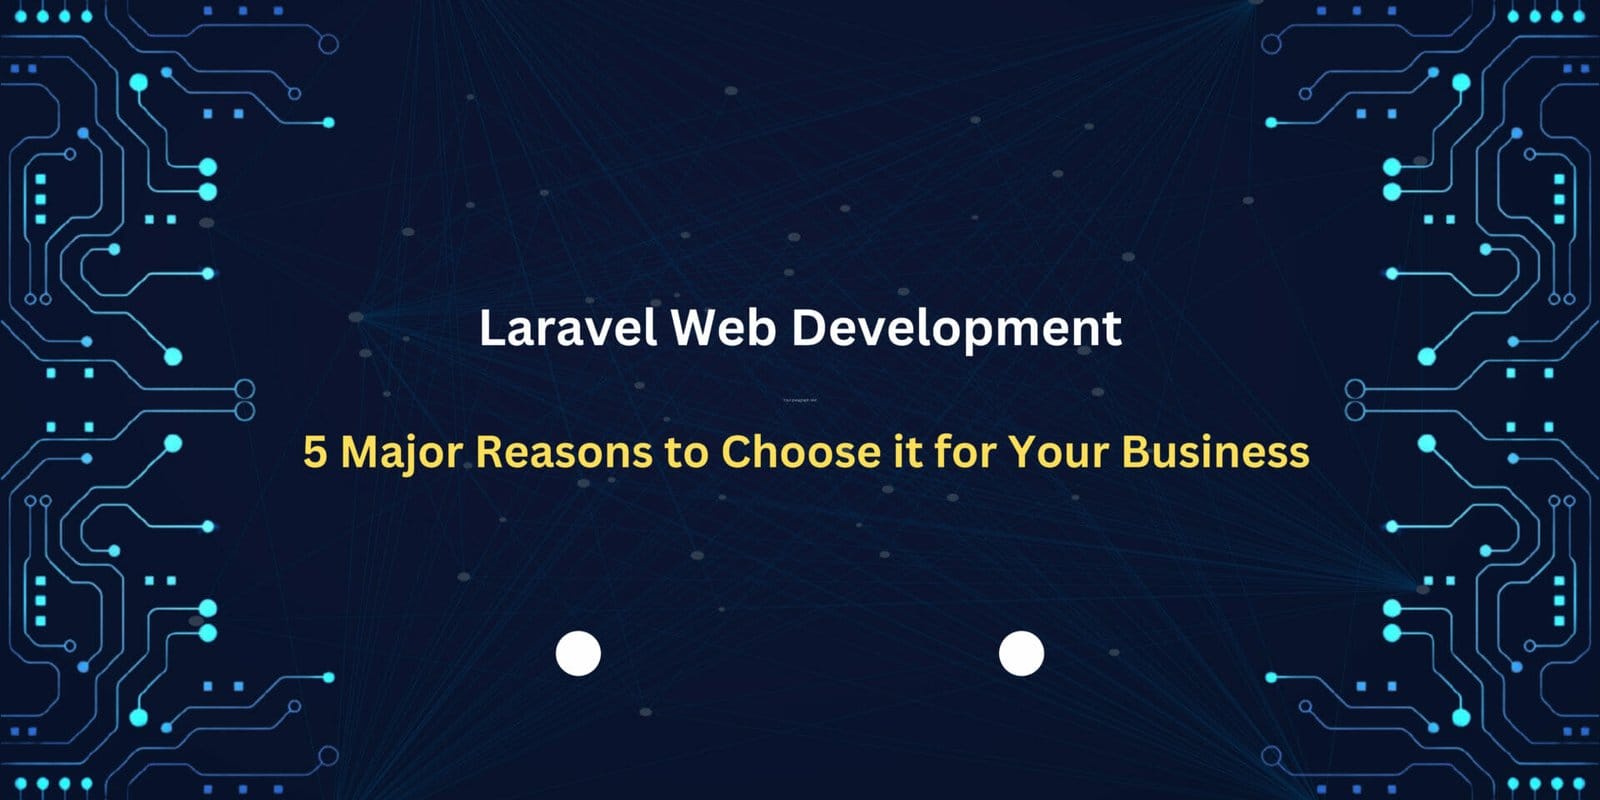 Laravel Web Development: 5 Major Reasons to Choose it for Your Business  